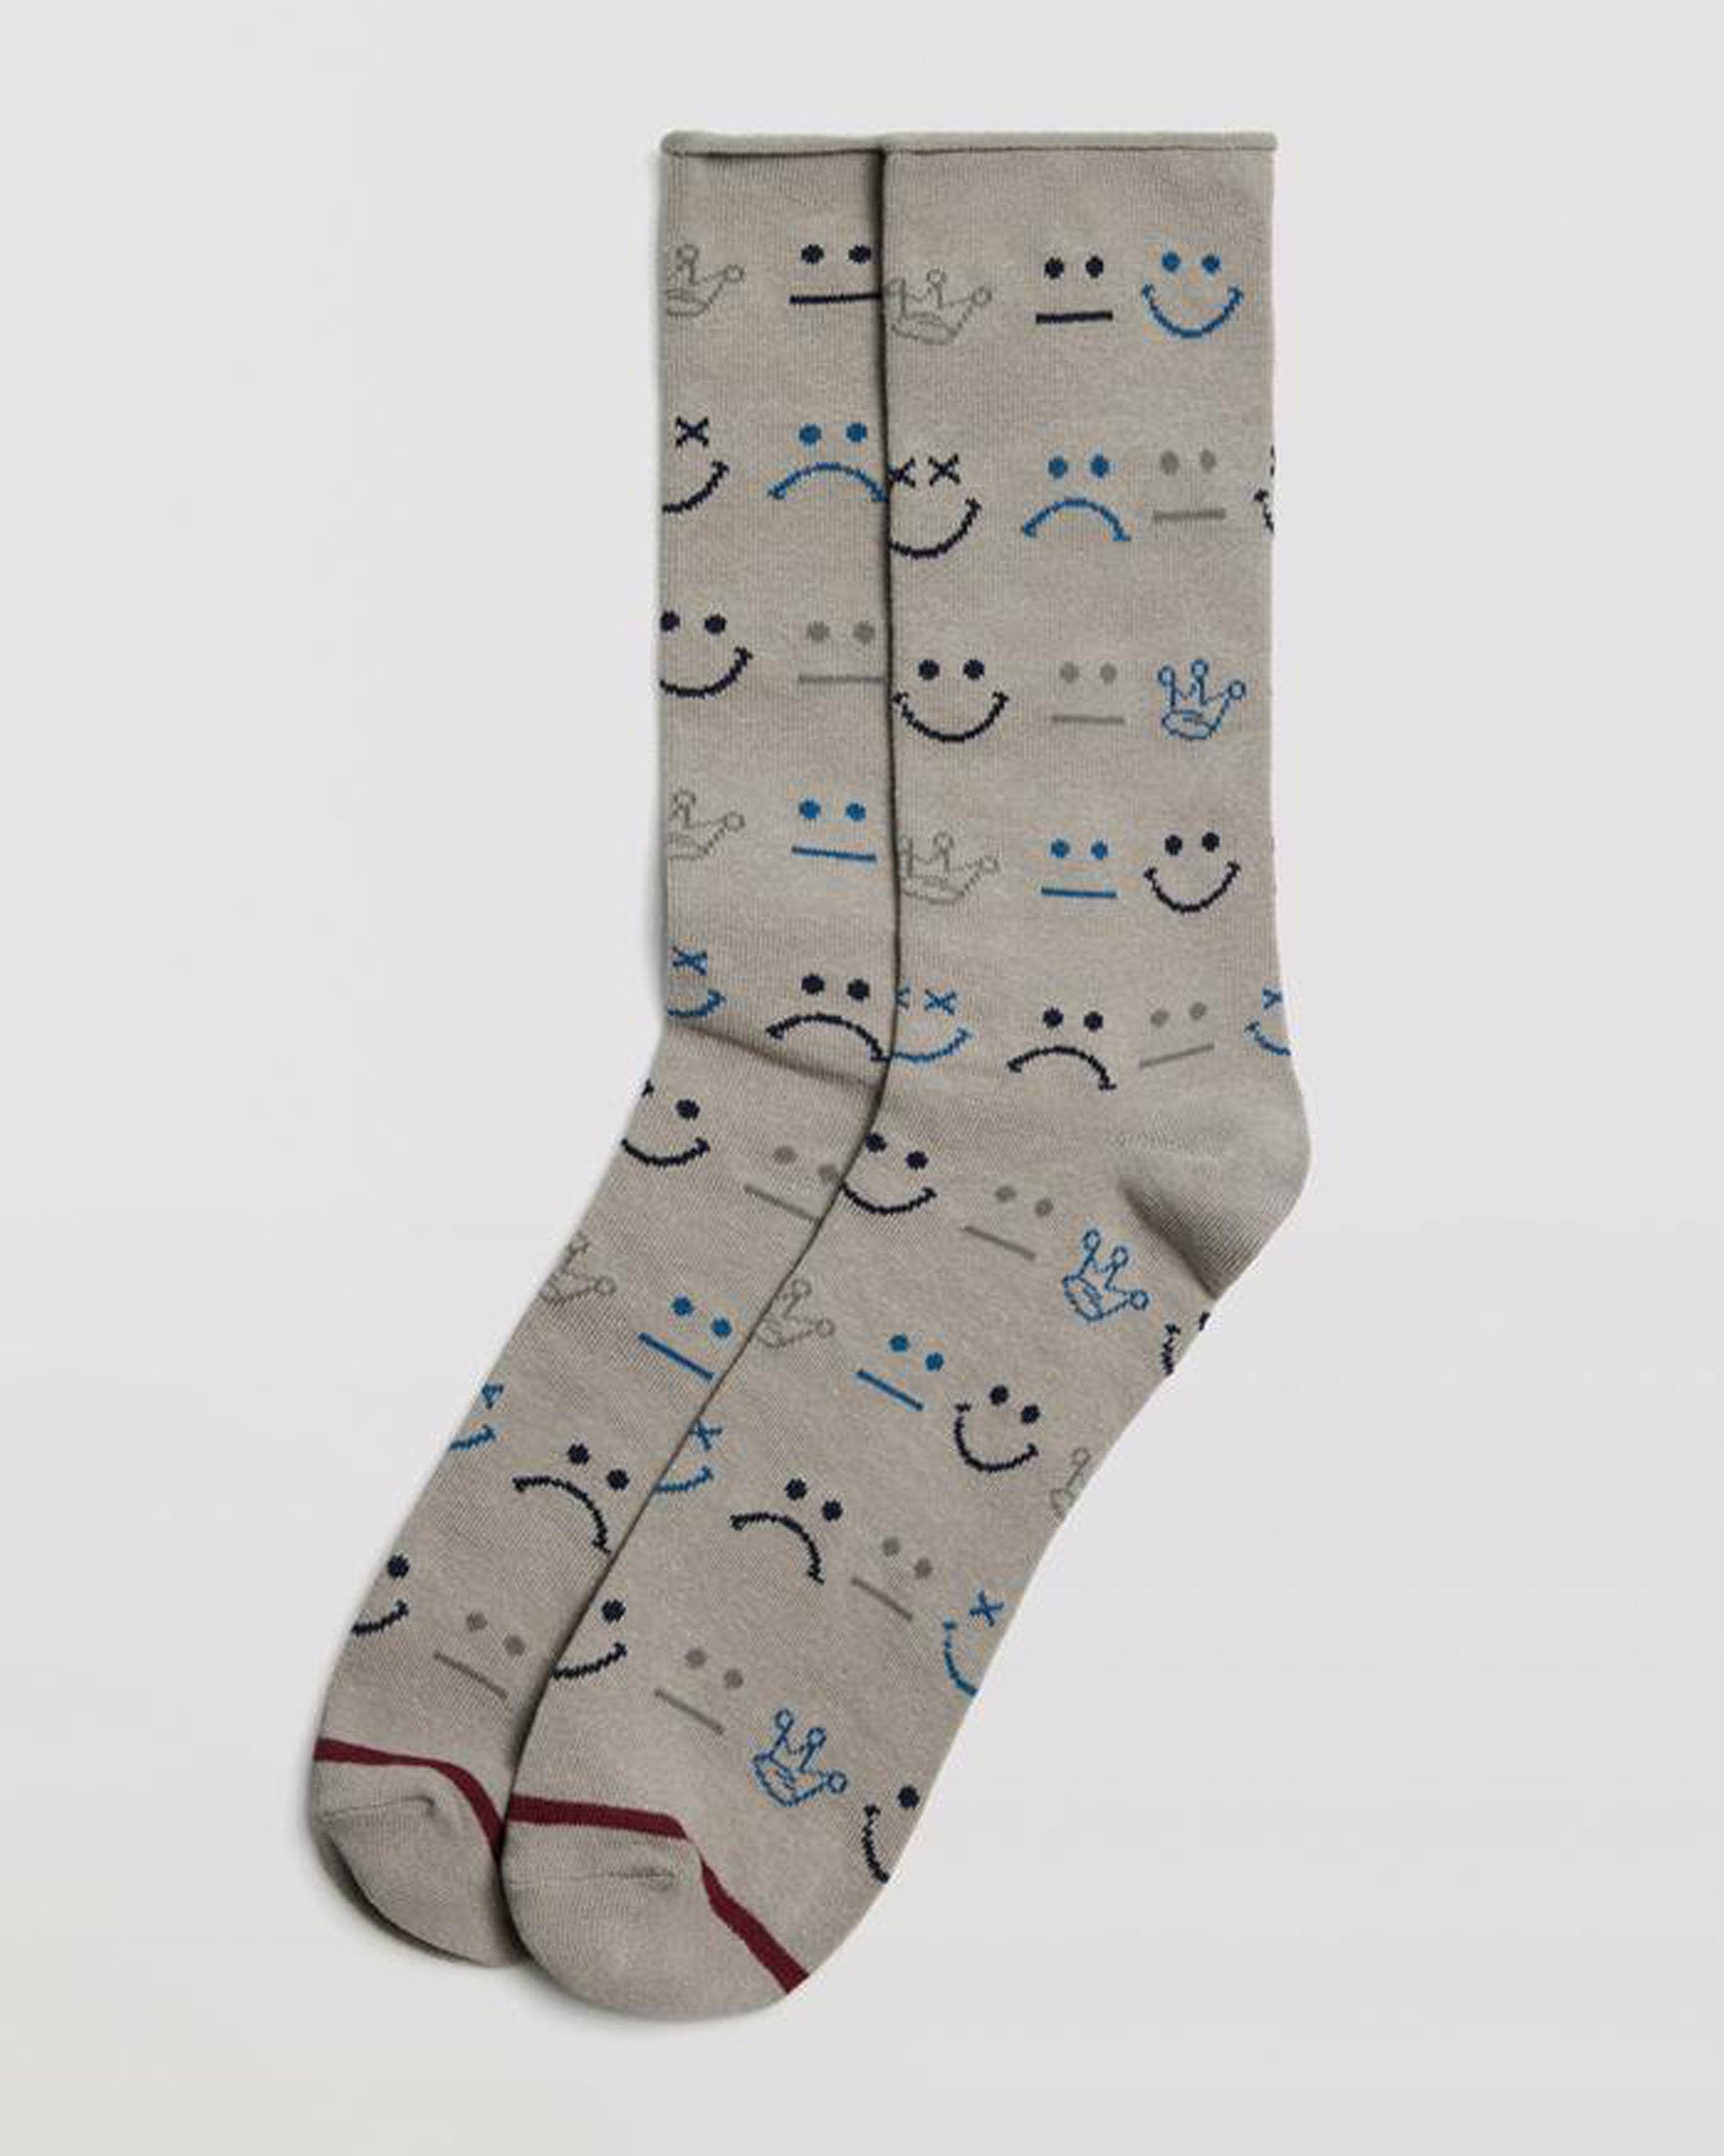 Ysabel Mora 22878 Face Sock - Light grey cotton mix crew length no cuff ankle socks with an all over assorted doodle faces and crown pattern in blue, black and grey with a wine stripe on the toe.